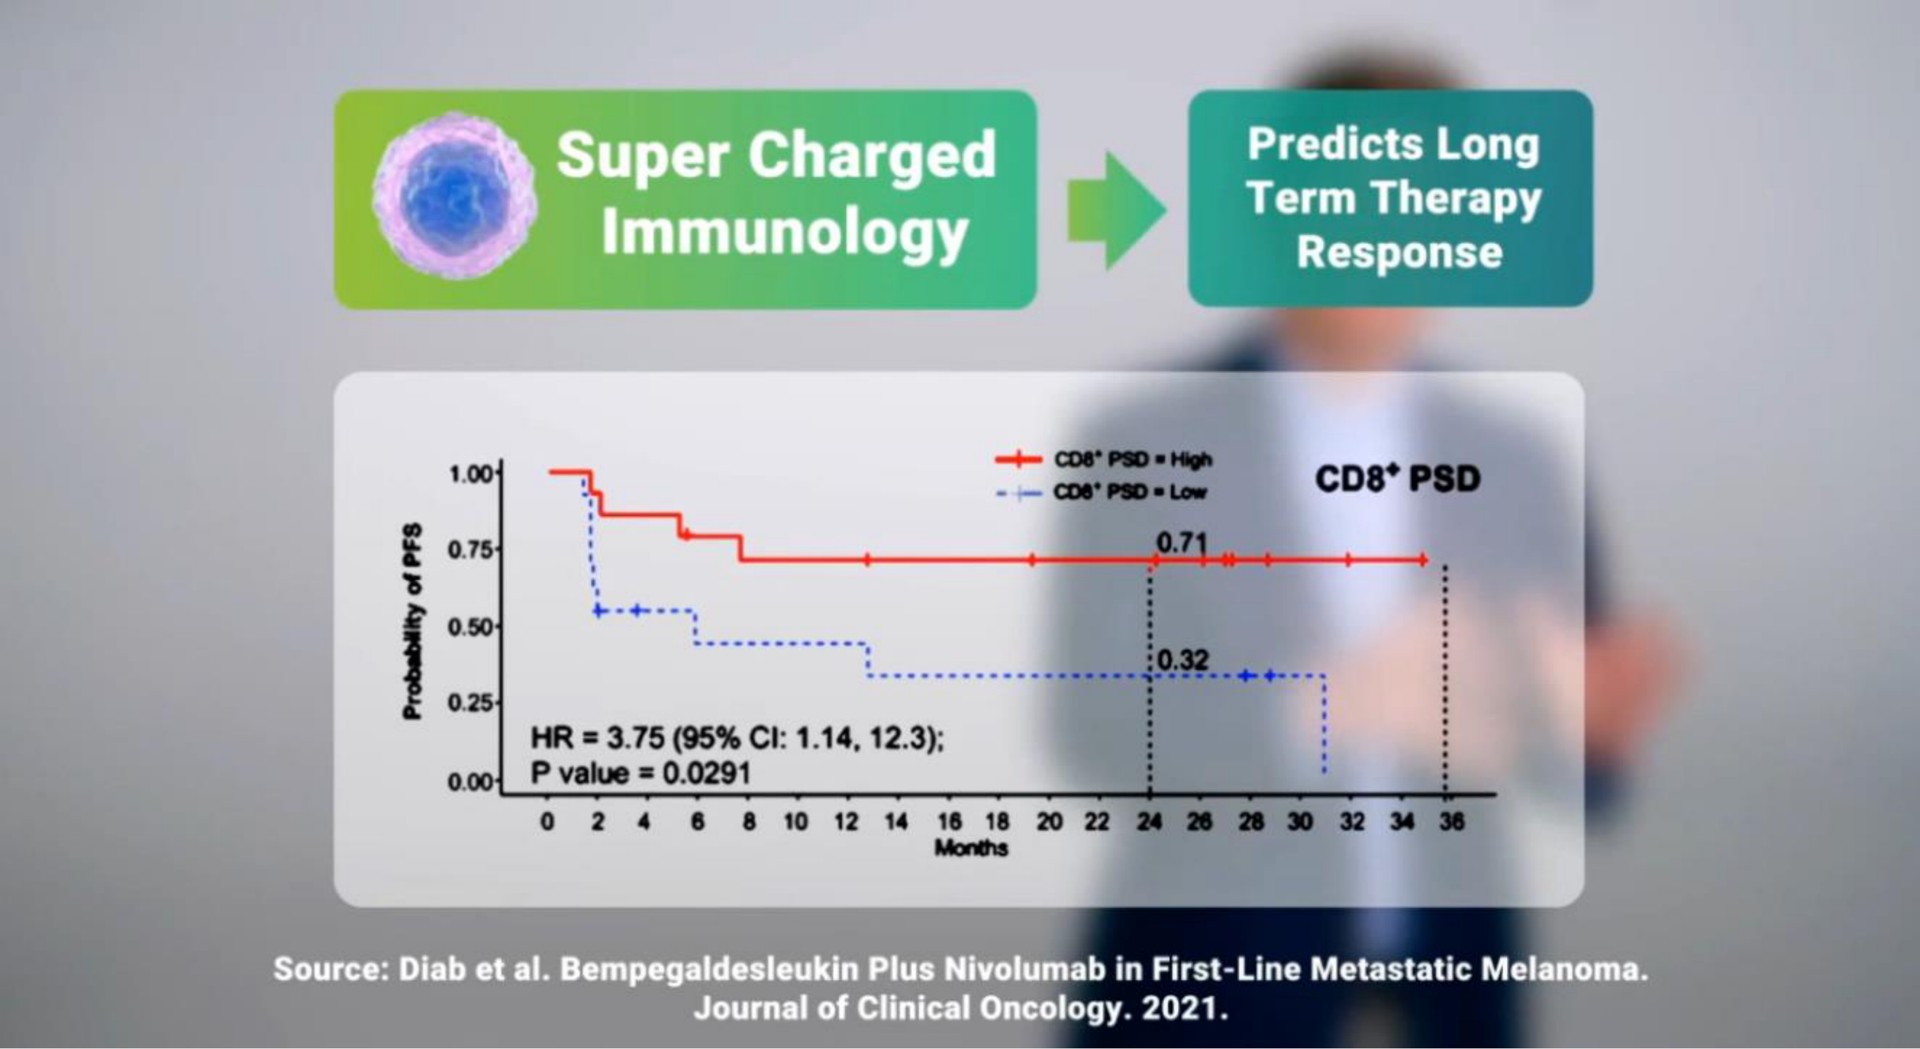 super charged immunology | Isoplexis